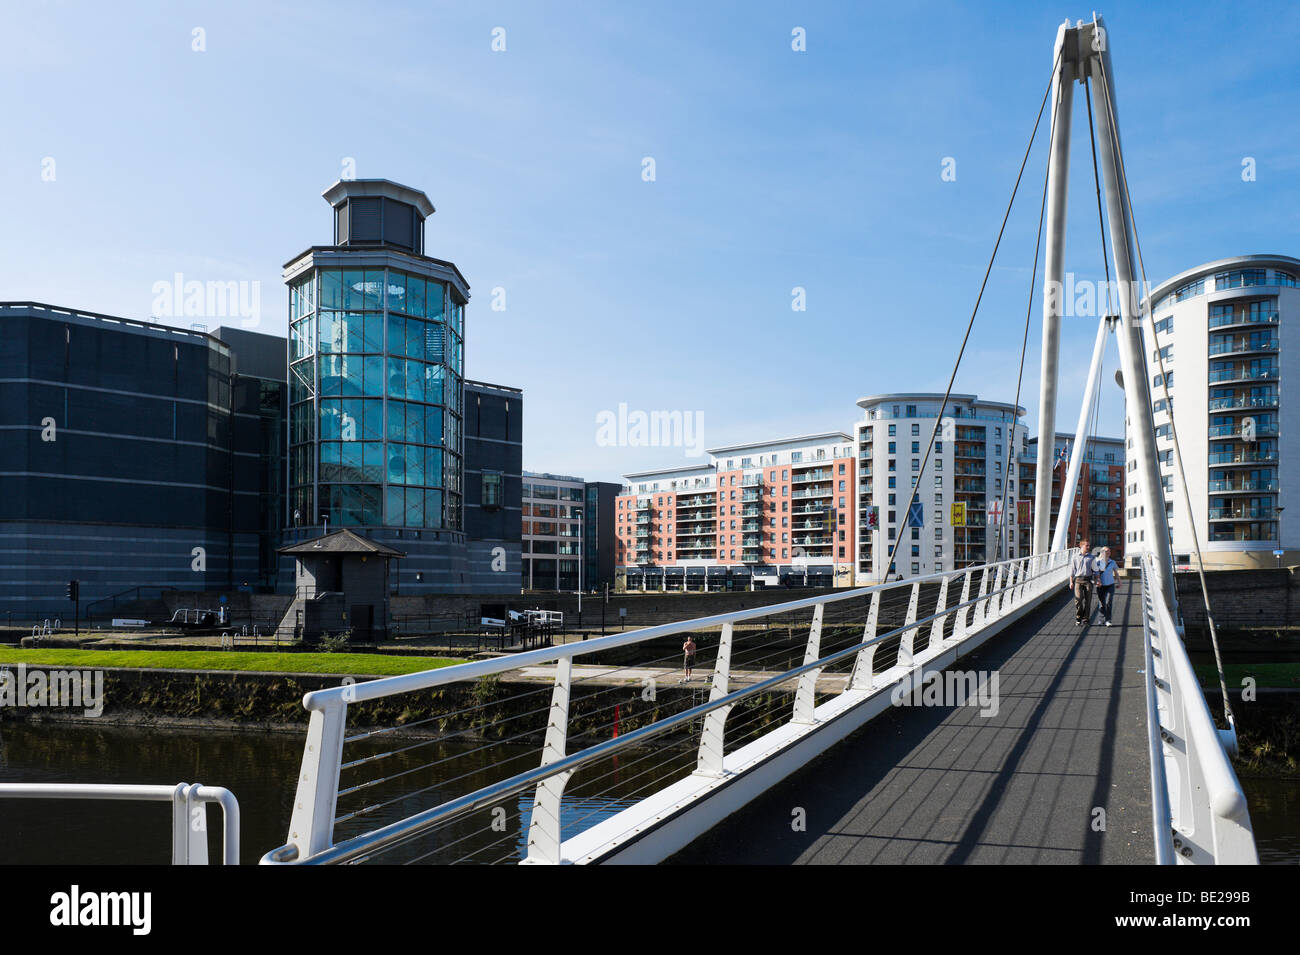 Das Royal Armouries Museum am Ufer des Flusses Aire, Clarence Dock, Leeds, West Yorkshire, England Stockfoto